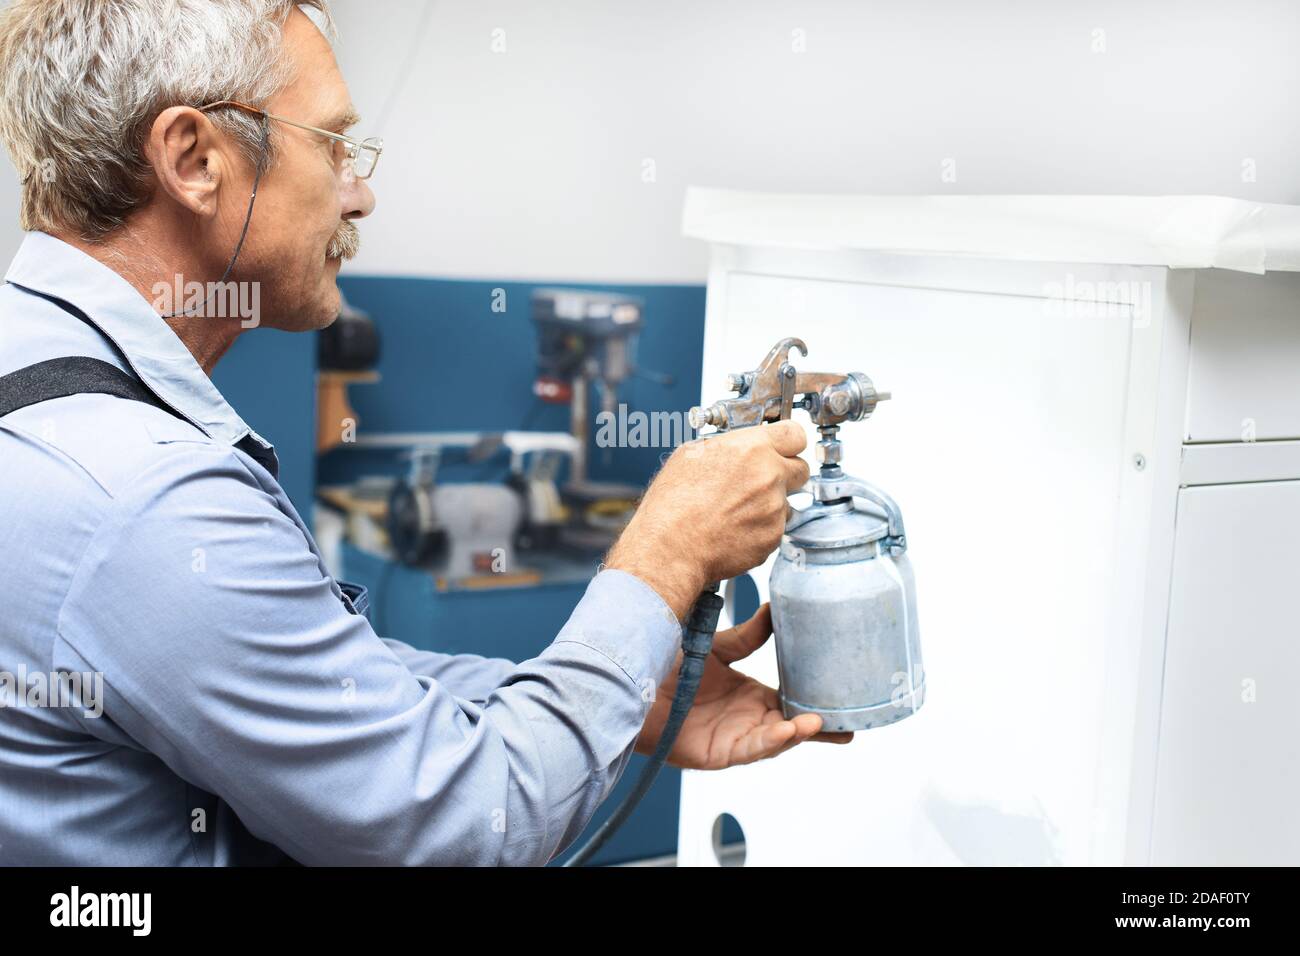 A pensioner with gray hair and glasses paints metal products. Additional earnings for an elderly person Stock Photo